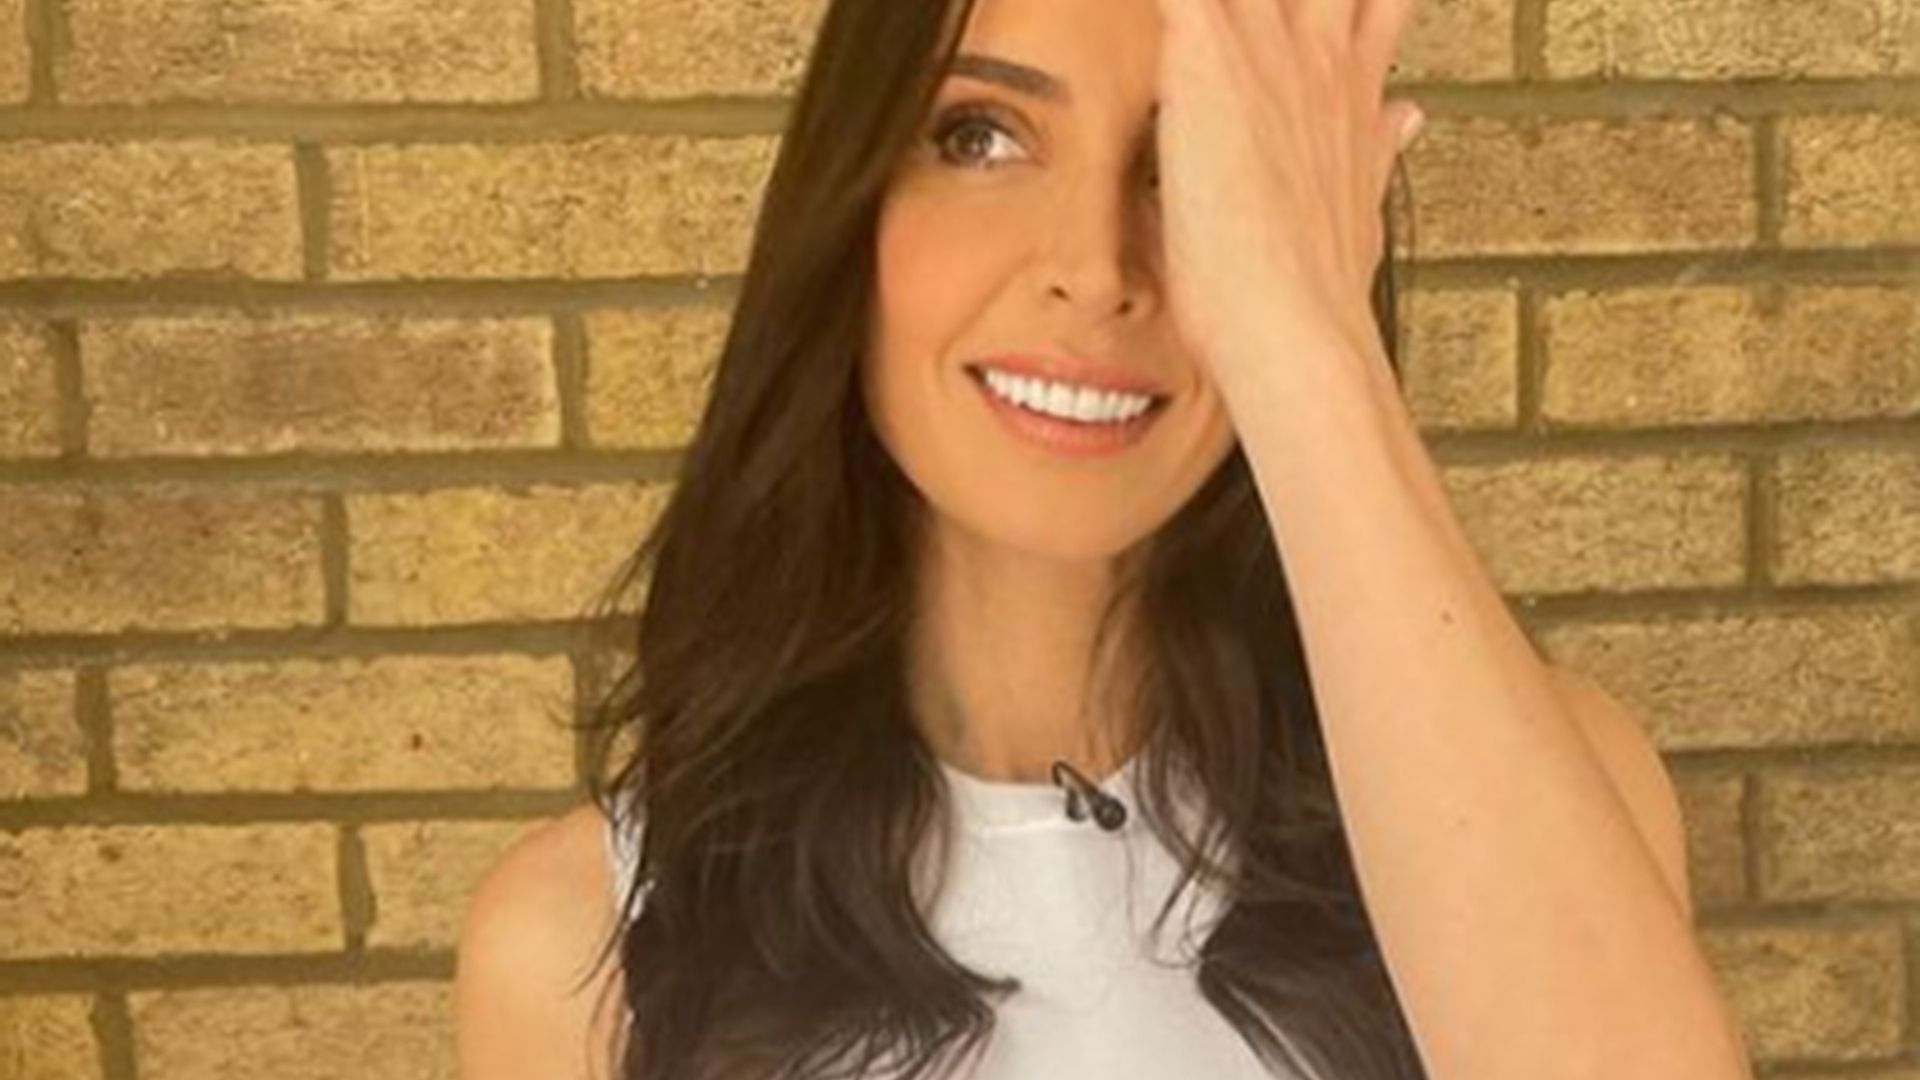 christine lampard outfit lorraine show instagram